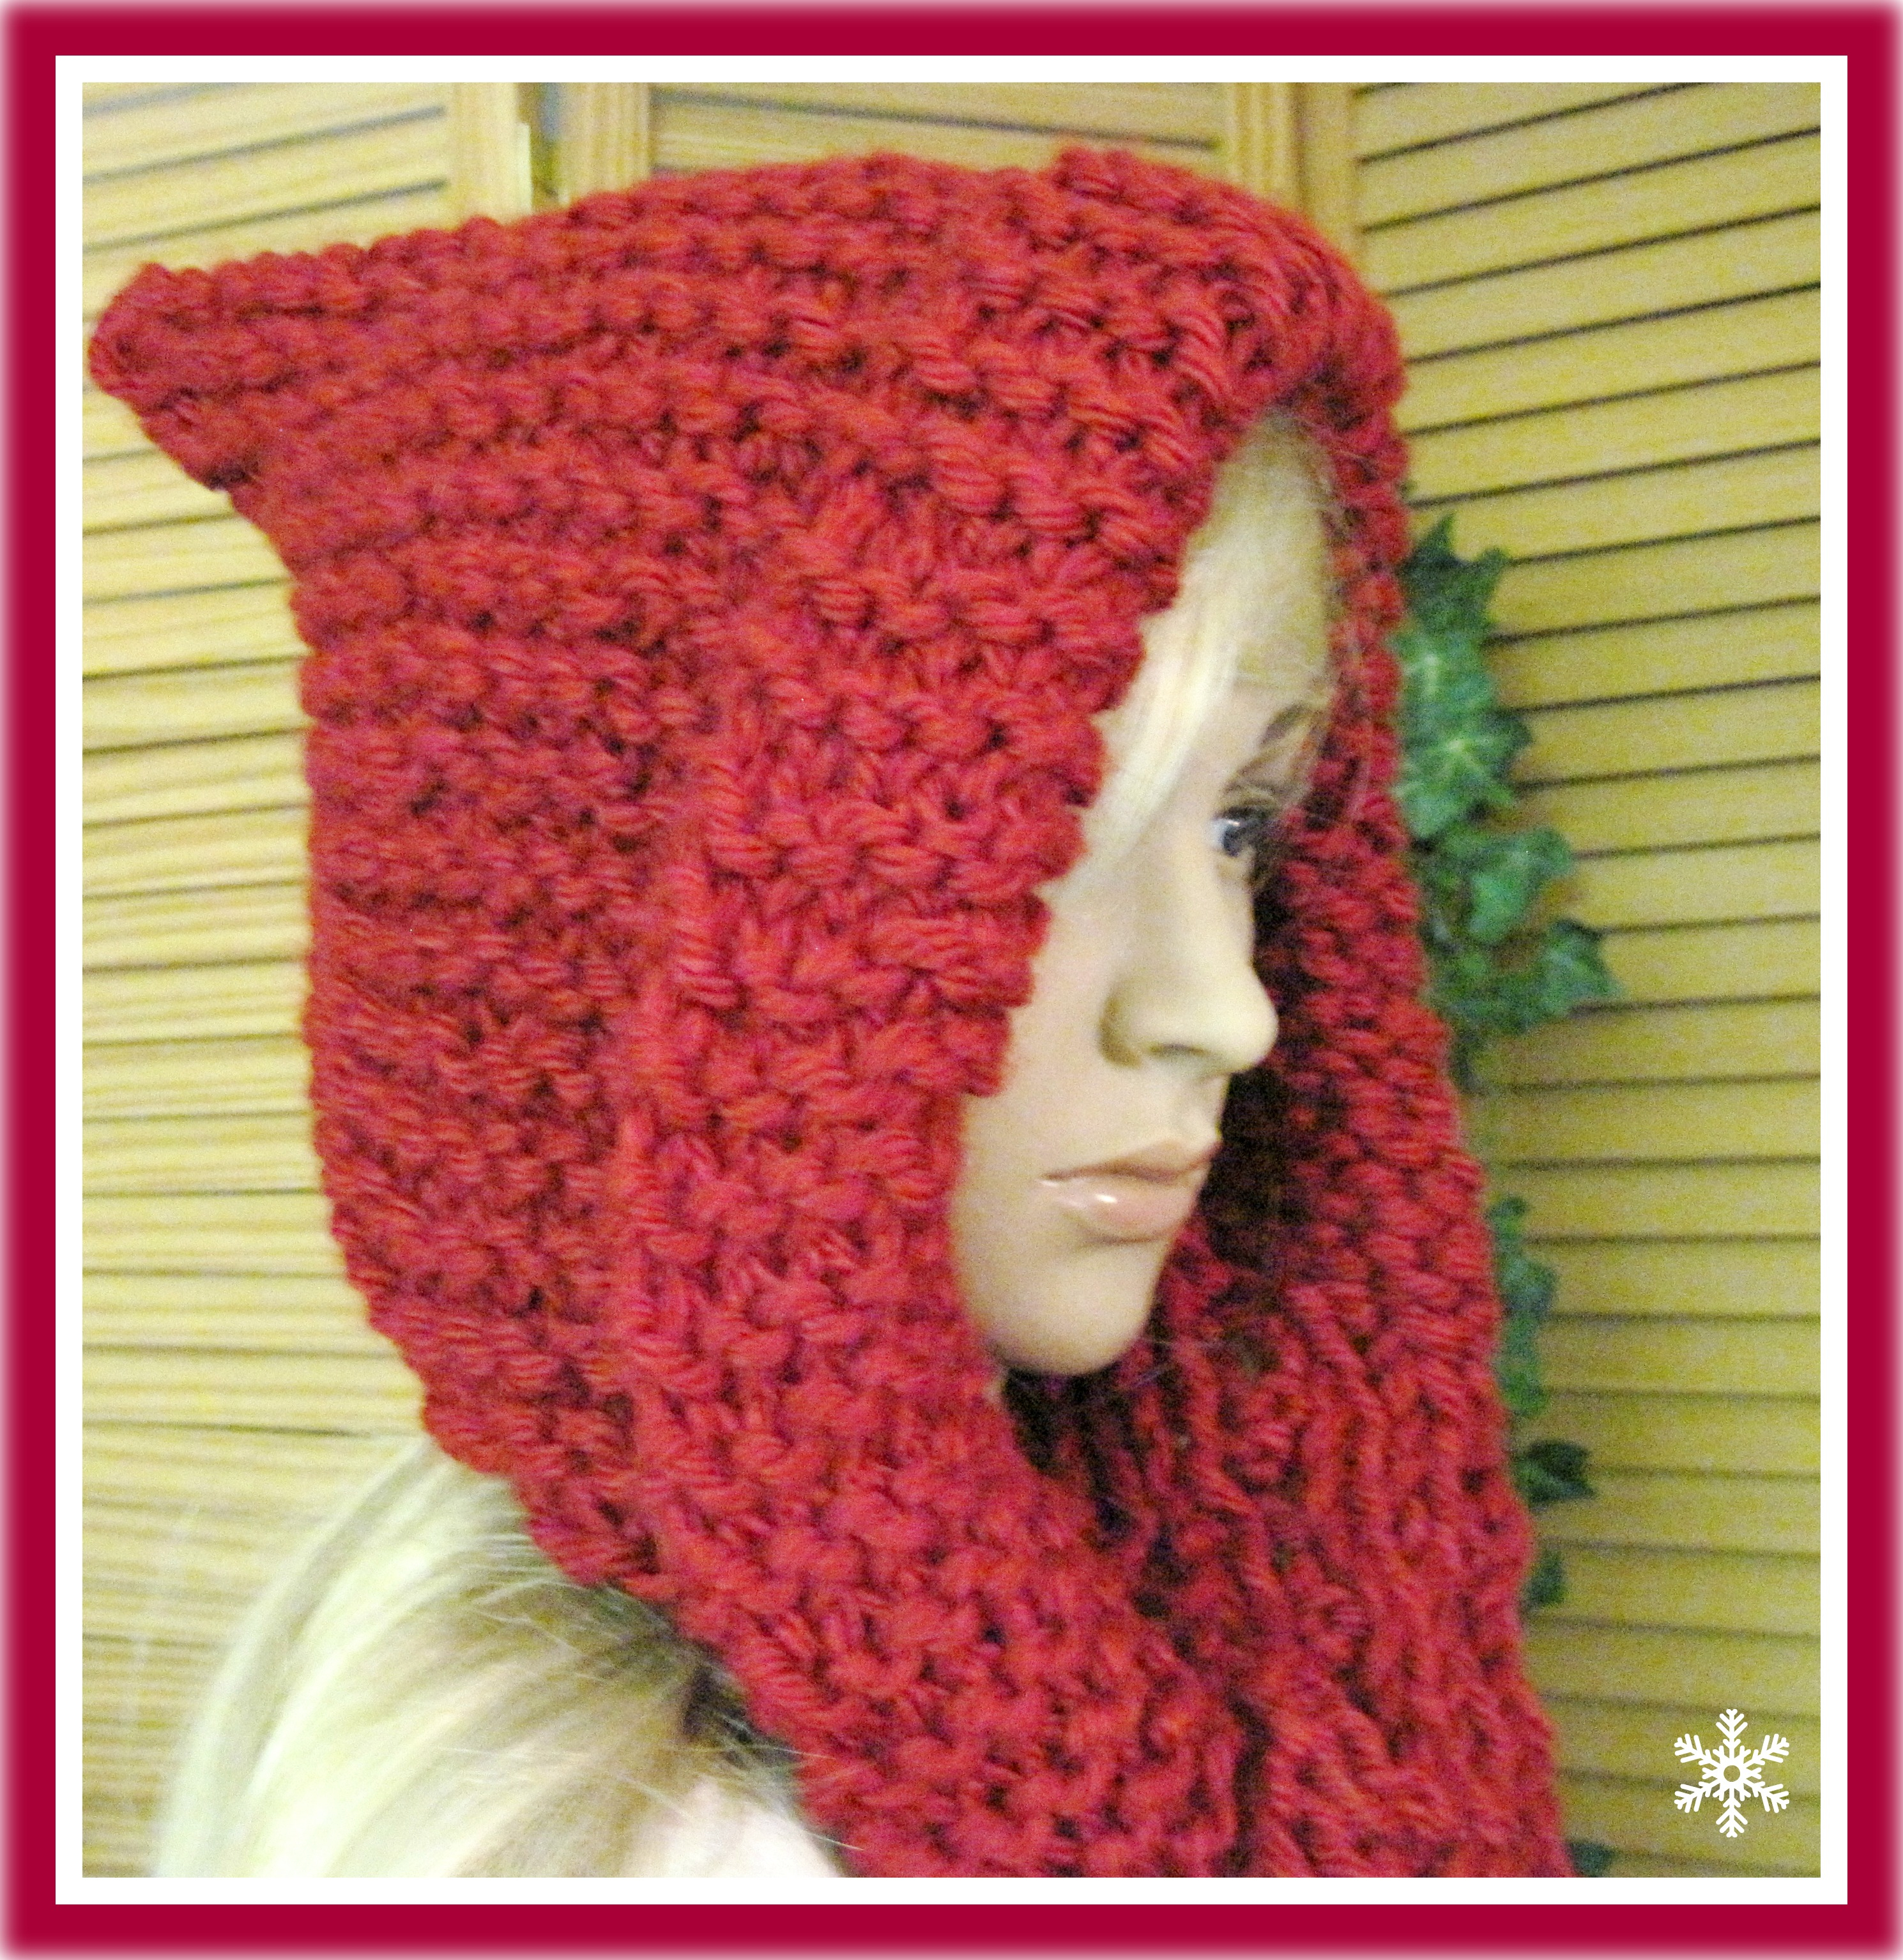 Knitted Hood Scarf Pattern Little Red Riding Hood Hooded Scarf In Bulky Yarn Knitting Pattern Adult Size